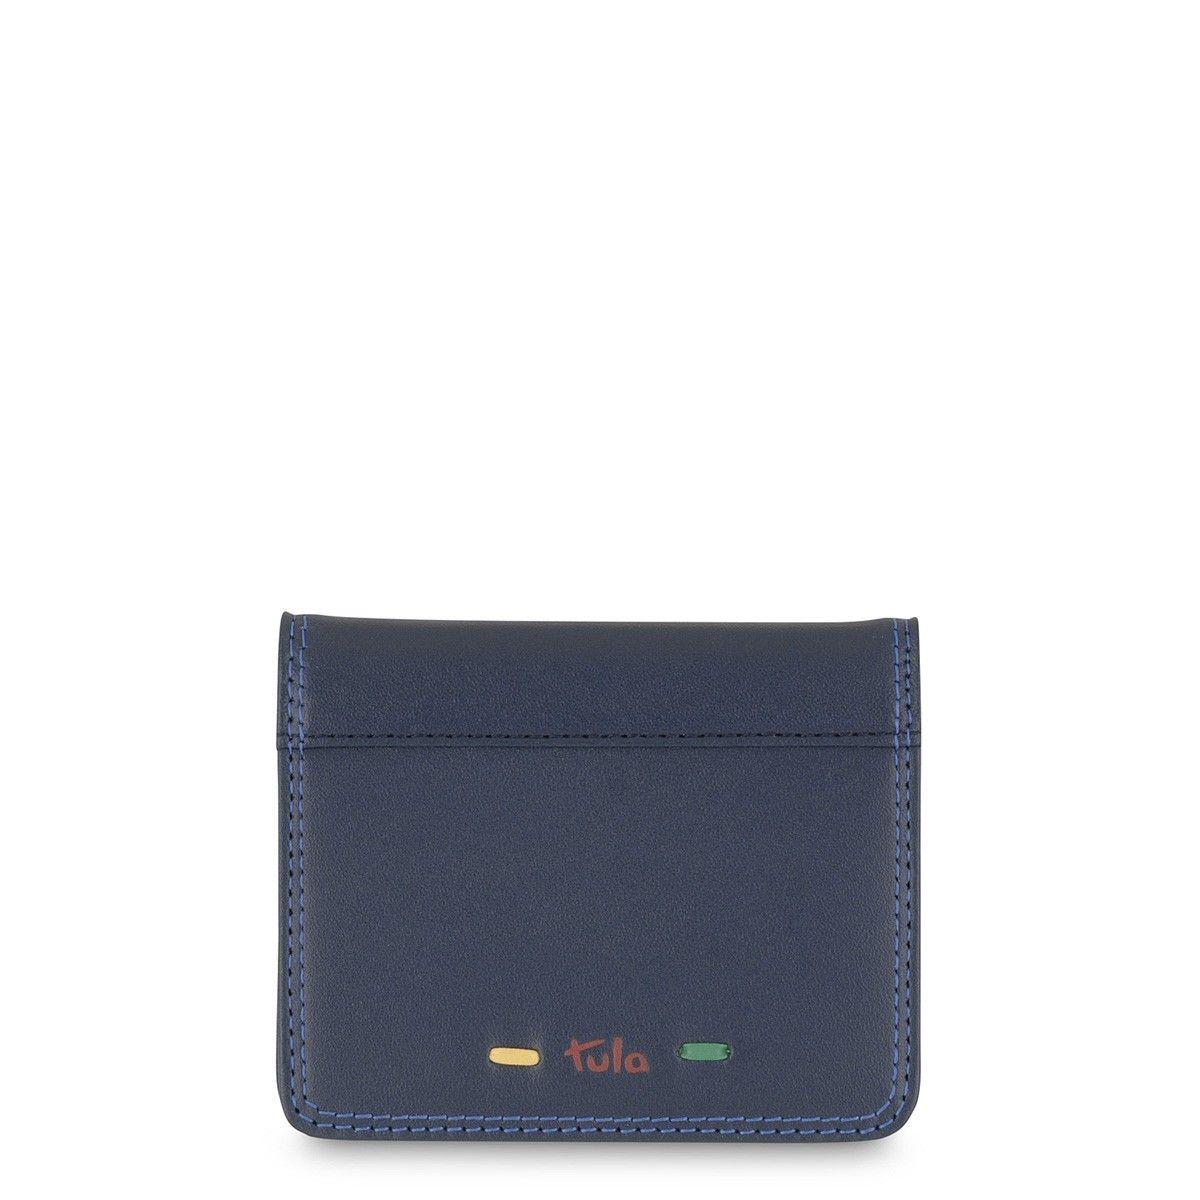 Small Credit Card Logo - Violet Small Creditcard Holder > Buy Credit Card Holders Online at ...